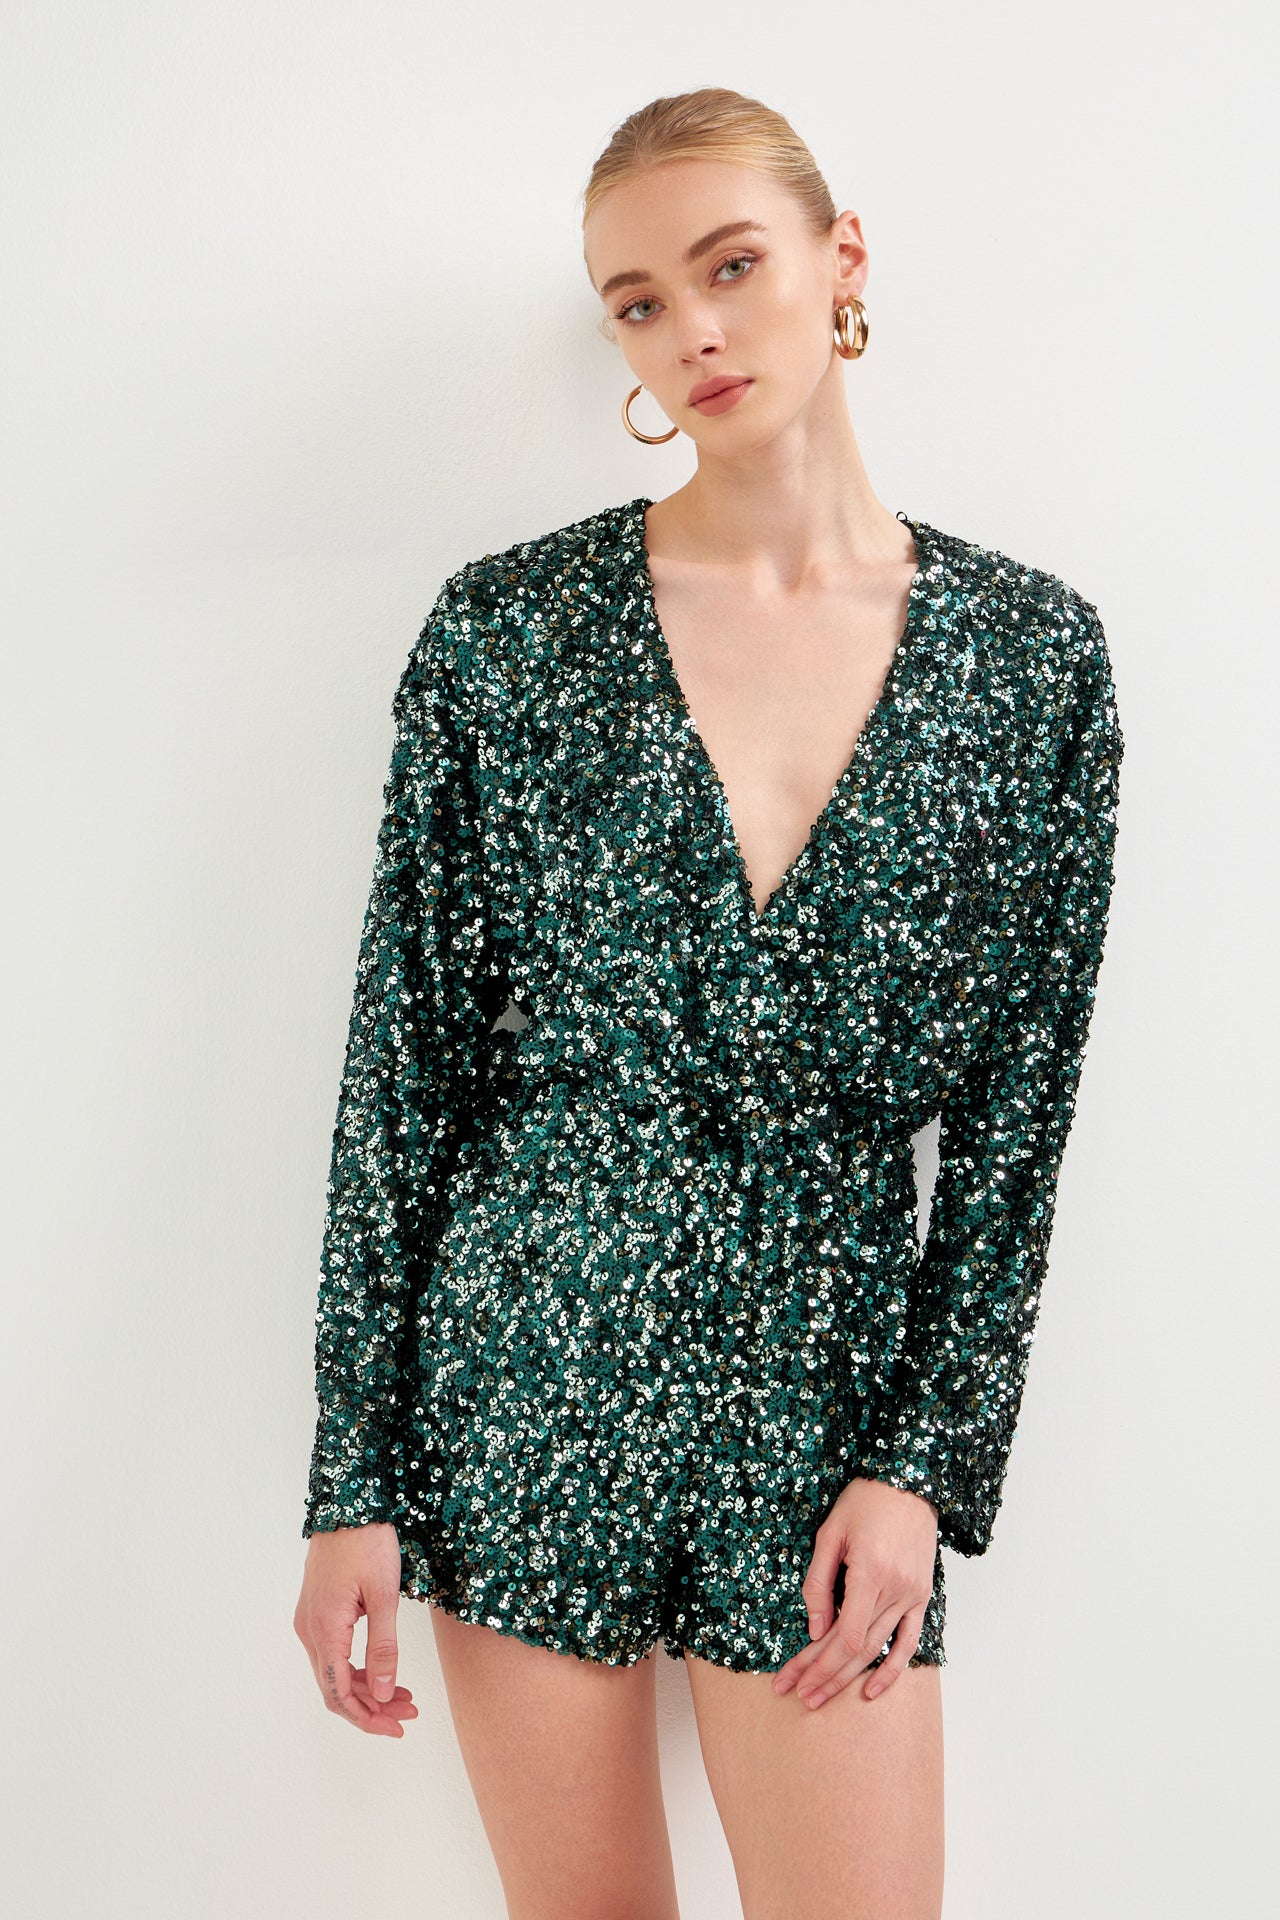 ENDLESS ROSE - Sequin Romper - ROMPERS available at Objectrare